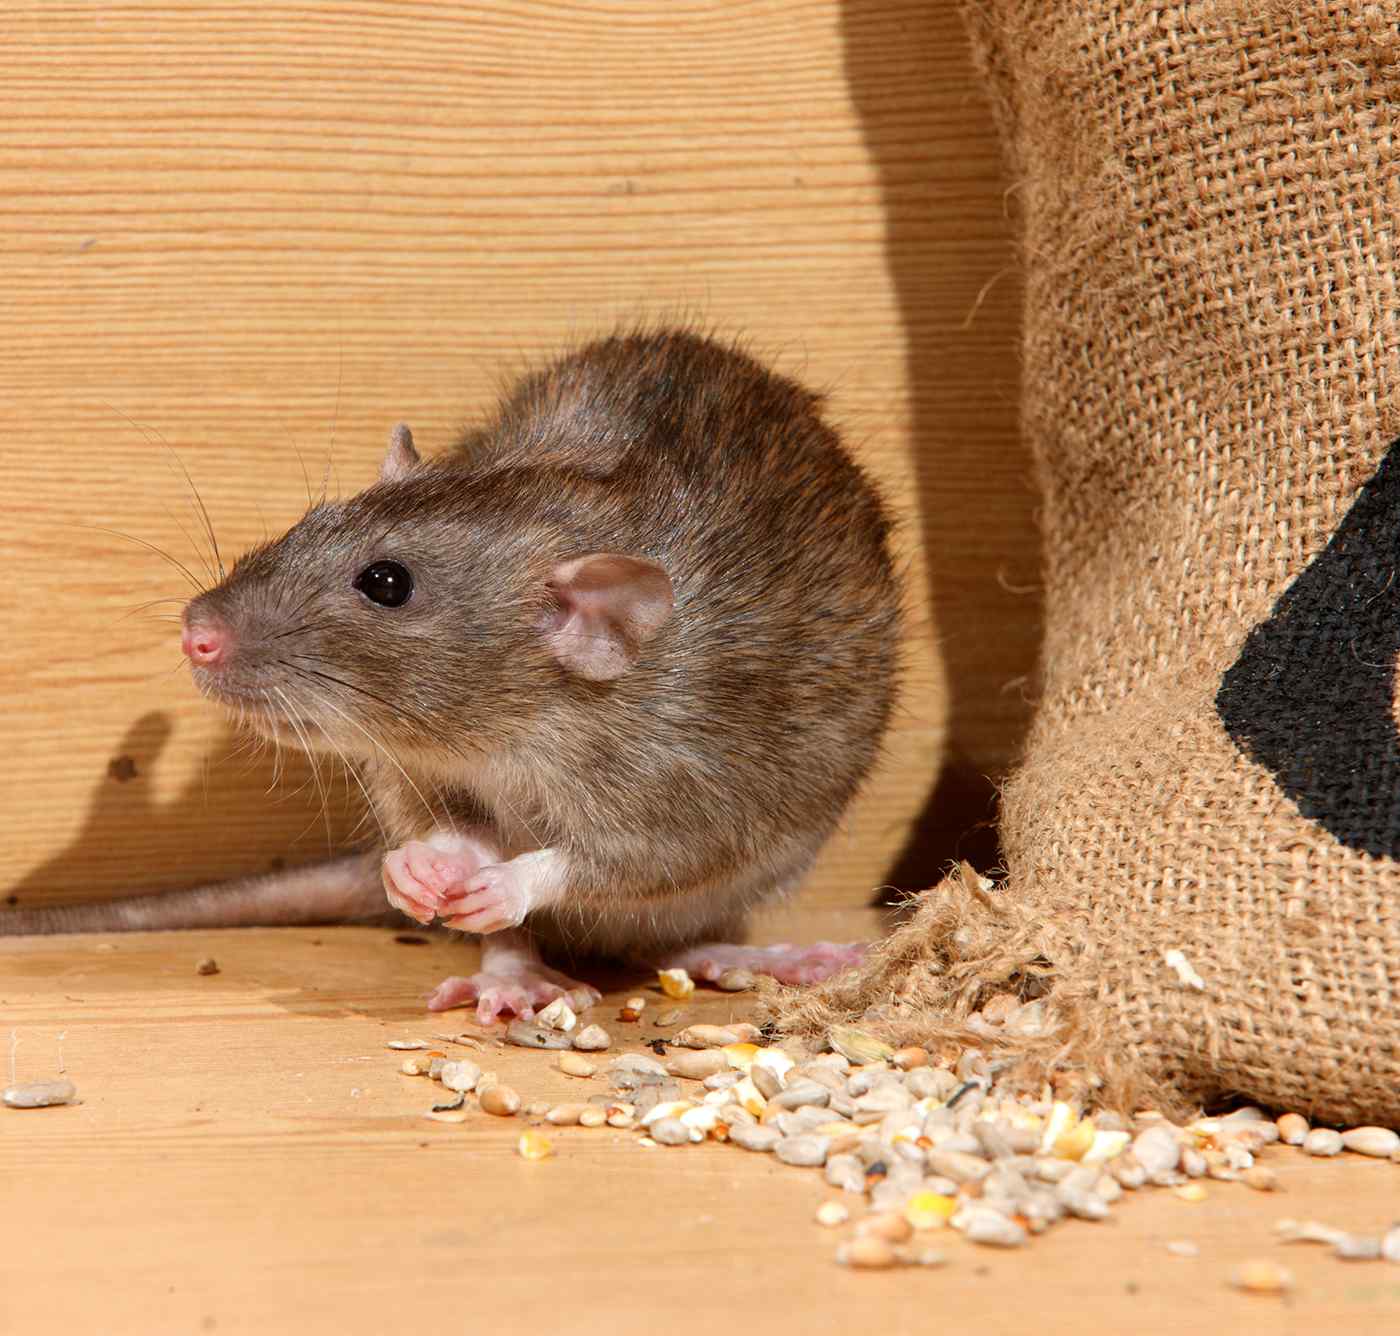 How To Get Rid Of Rats Or Other Rodents In Your Attic - The Bug Master Pest  Control and Disinfecting